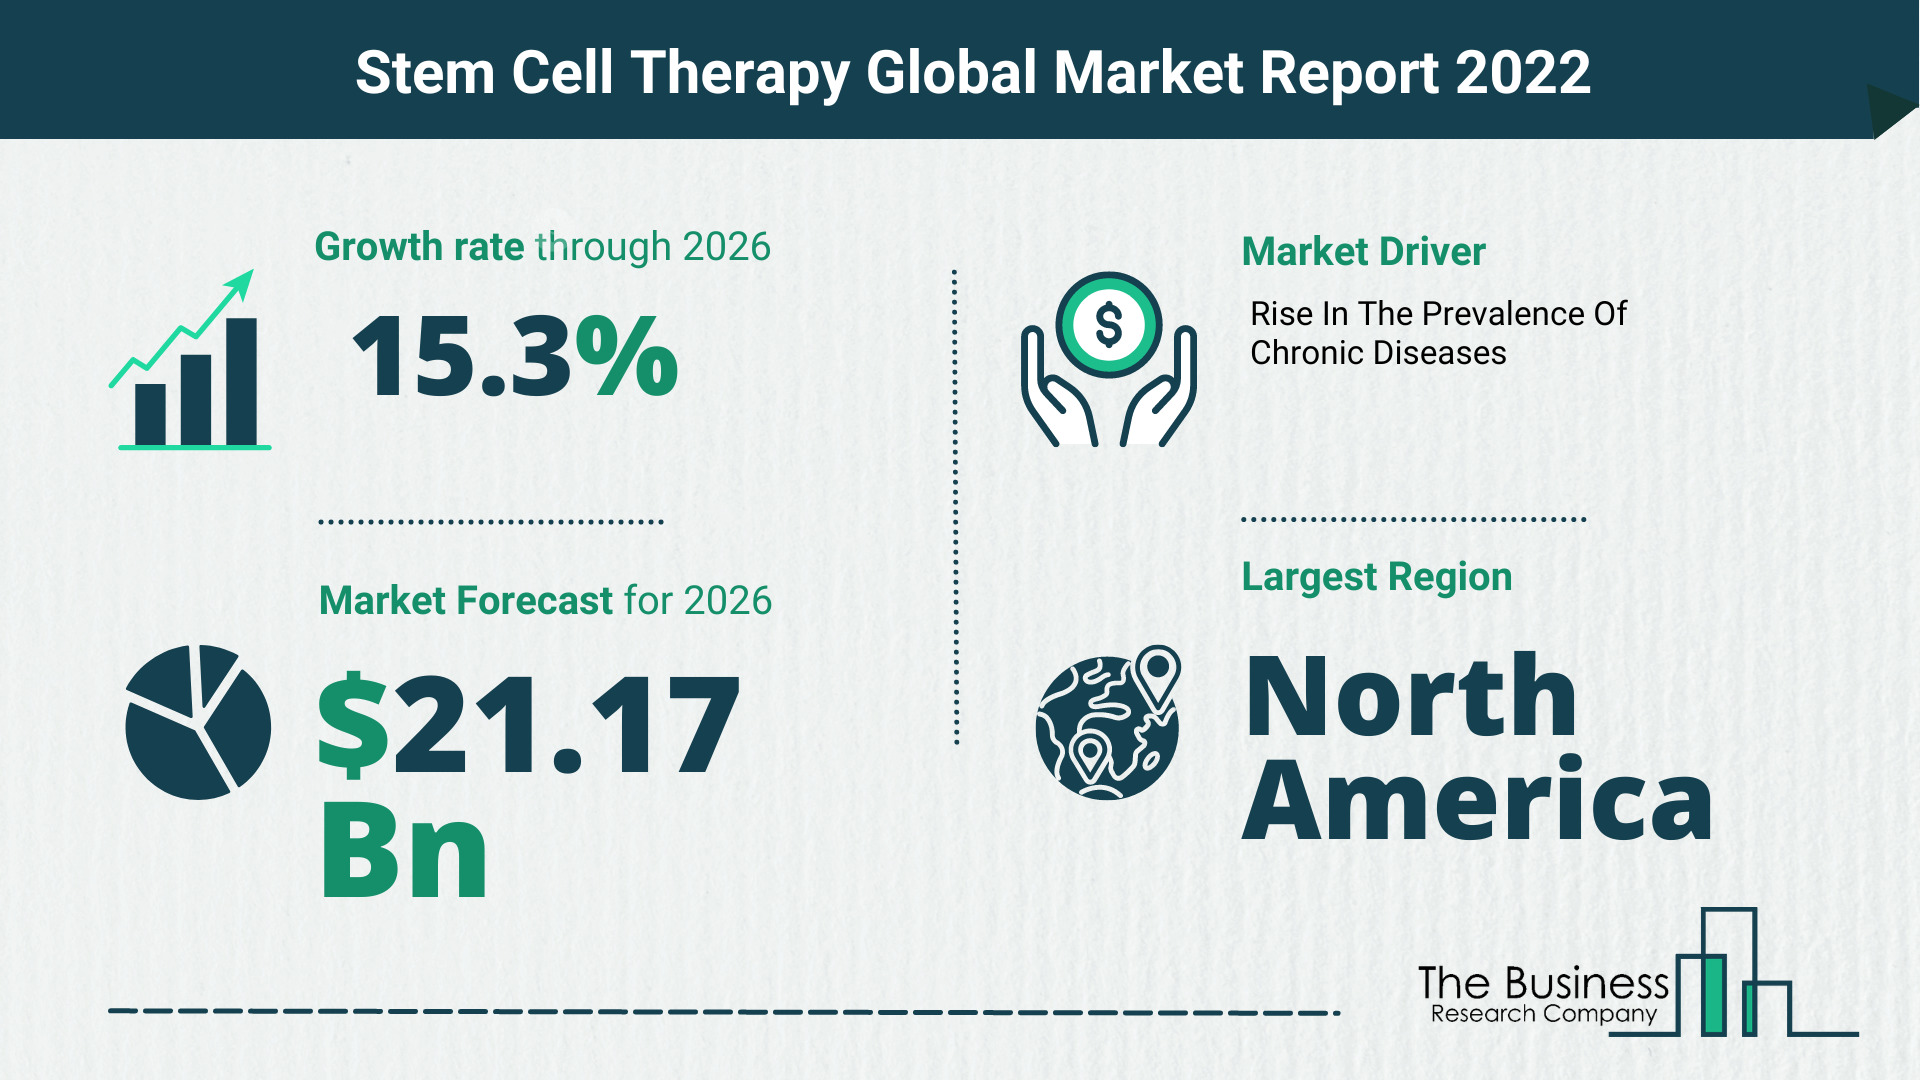 What Is The Stem Cell Therapy Market Overview In 2022?